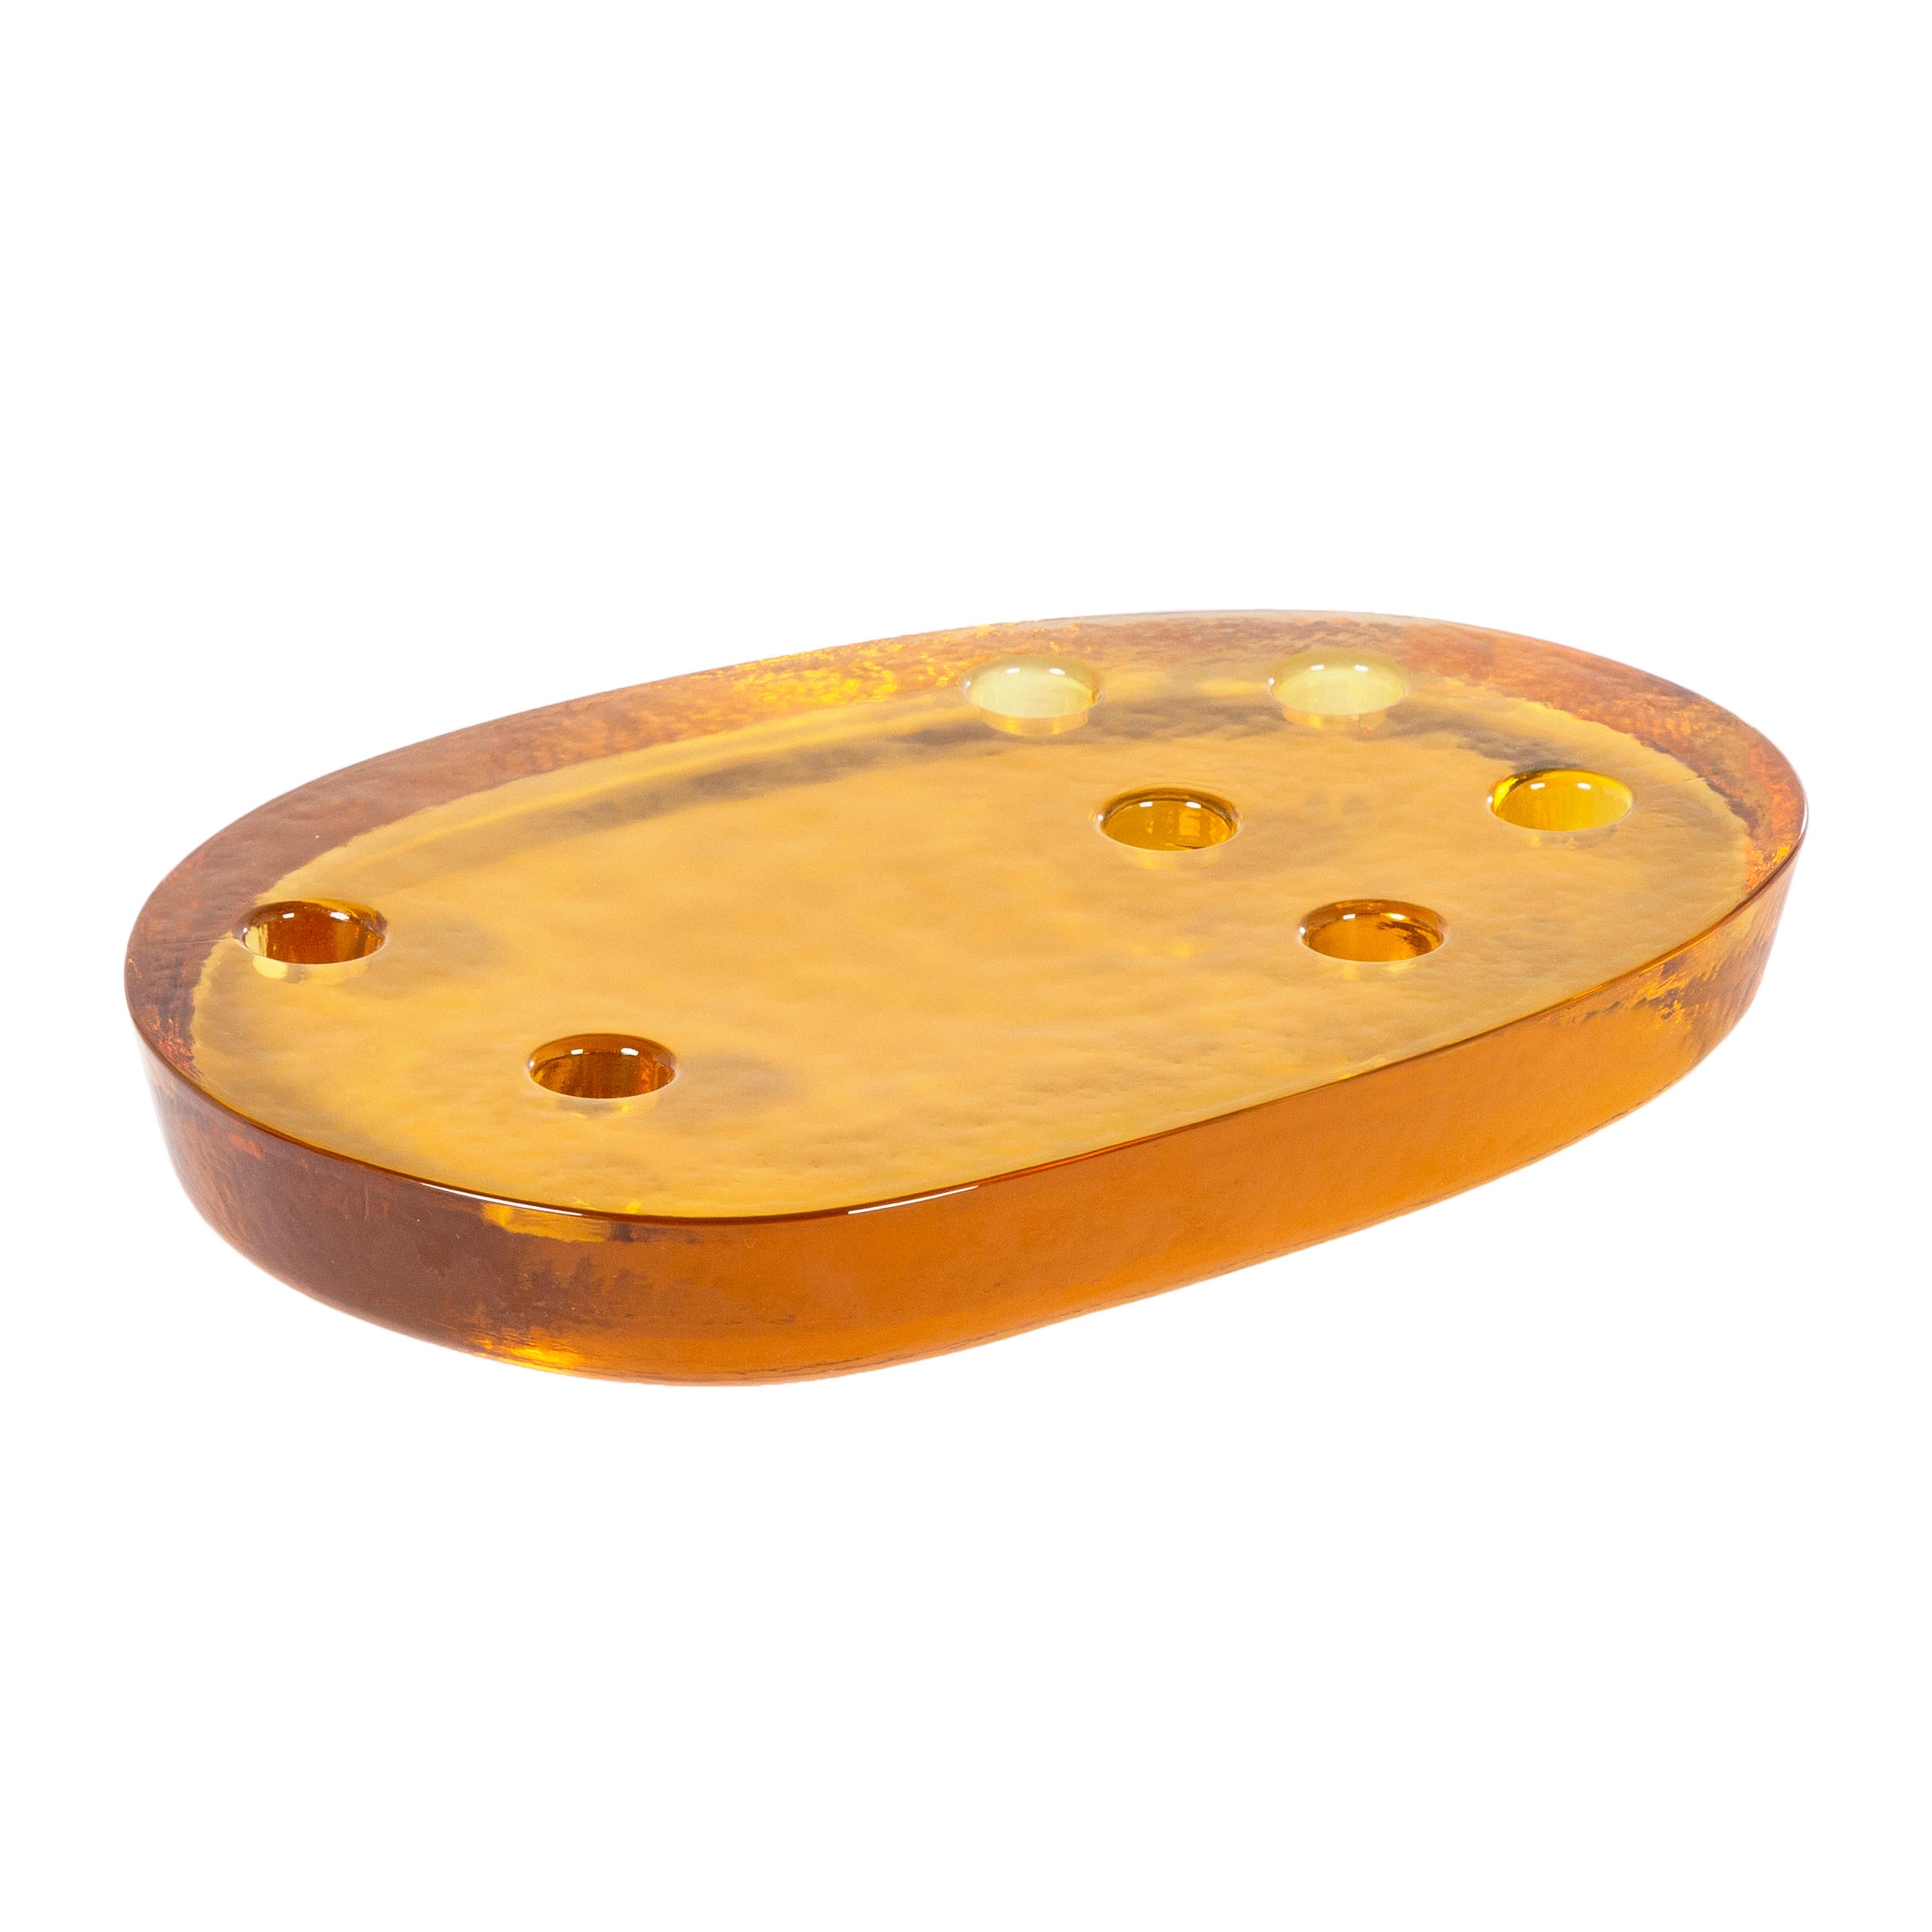 Atoll Big Amber candle holder by Pulpo
Dimensions: D32 x W22 x H4 cm
Materials: casted glass

Also available in different colours. 

These simple forms refer to the free-form nature of volcanic islands – much like the changing of glass from